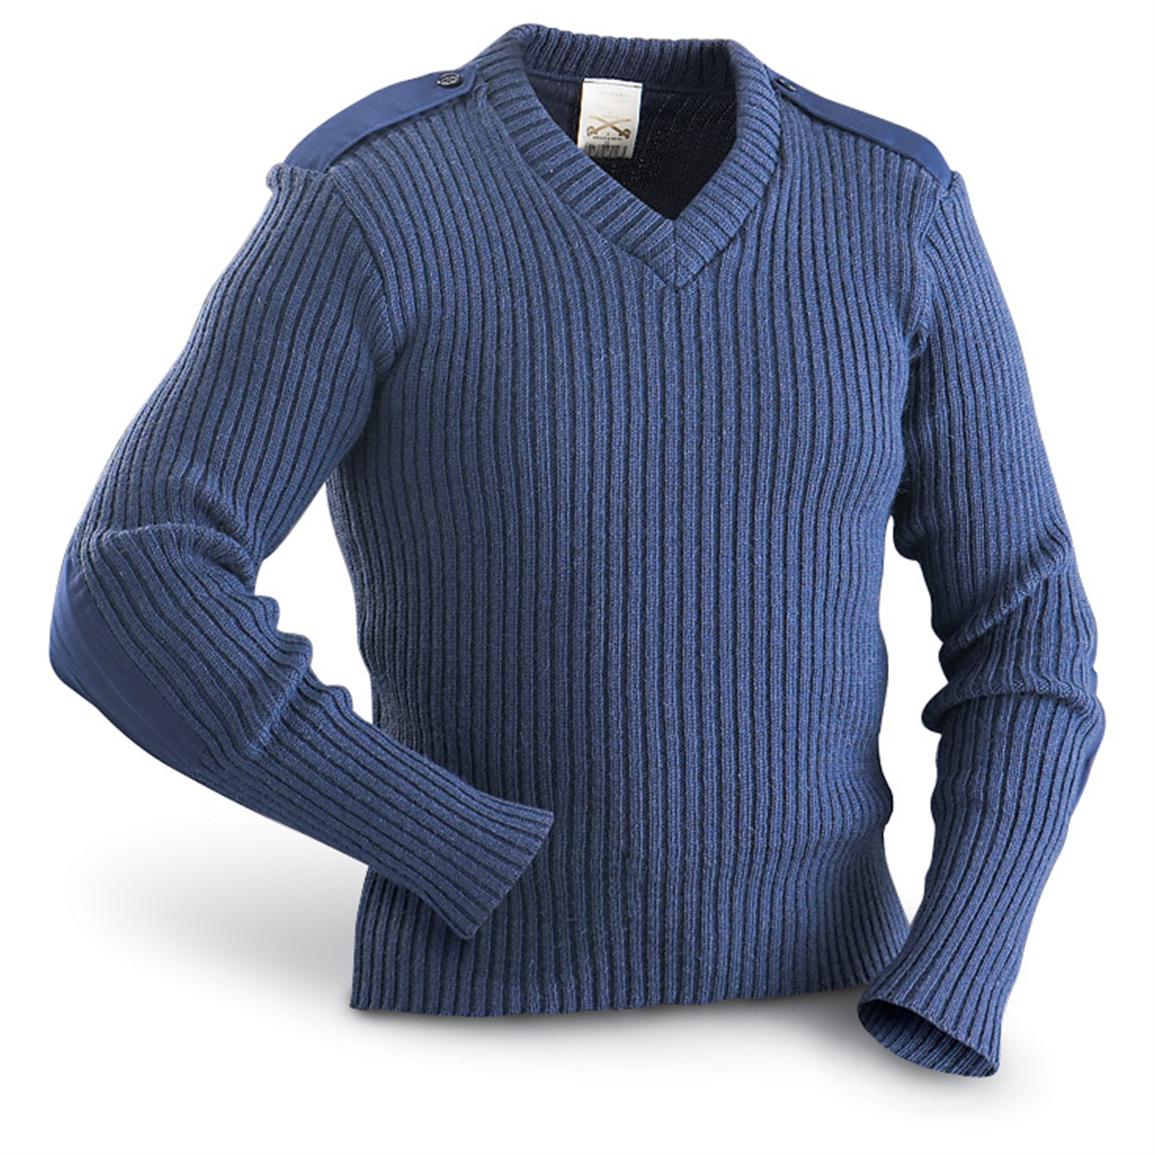 New British Military Sweater, Navy - 127651, Shirts at Sportsman's Guide